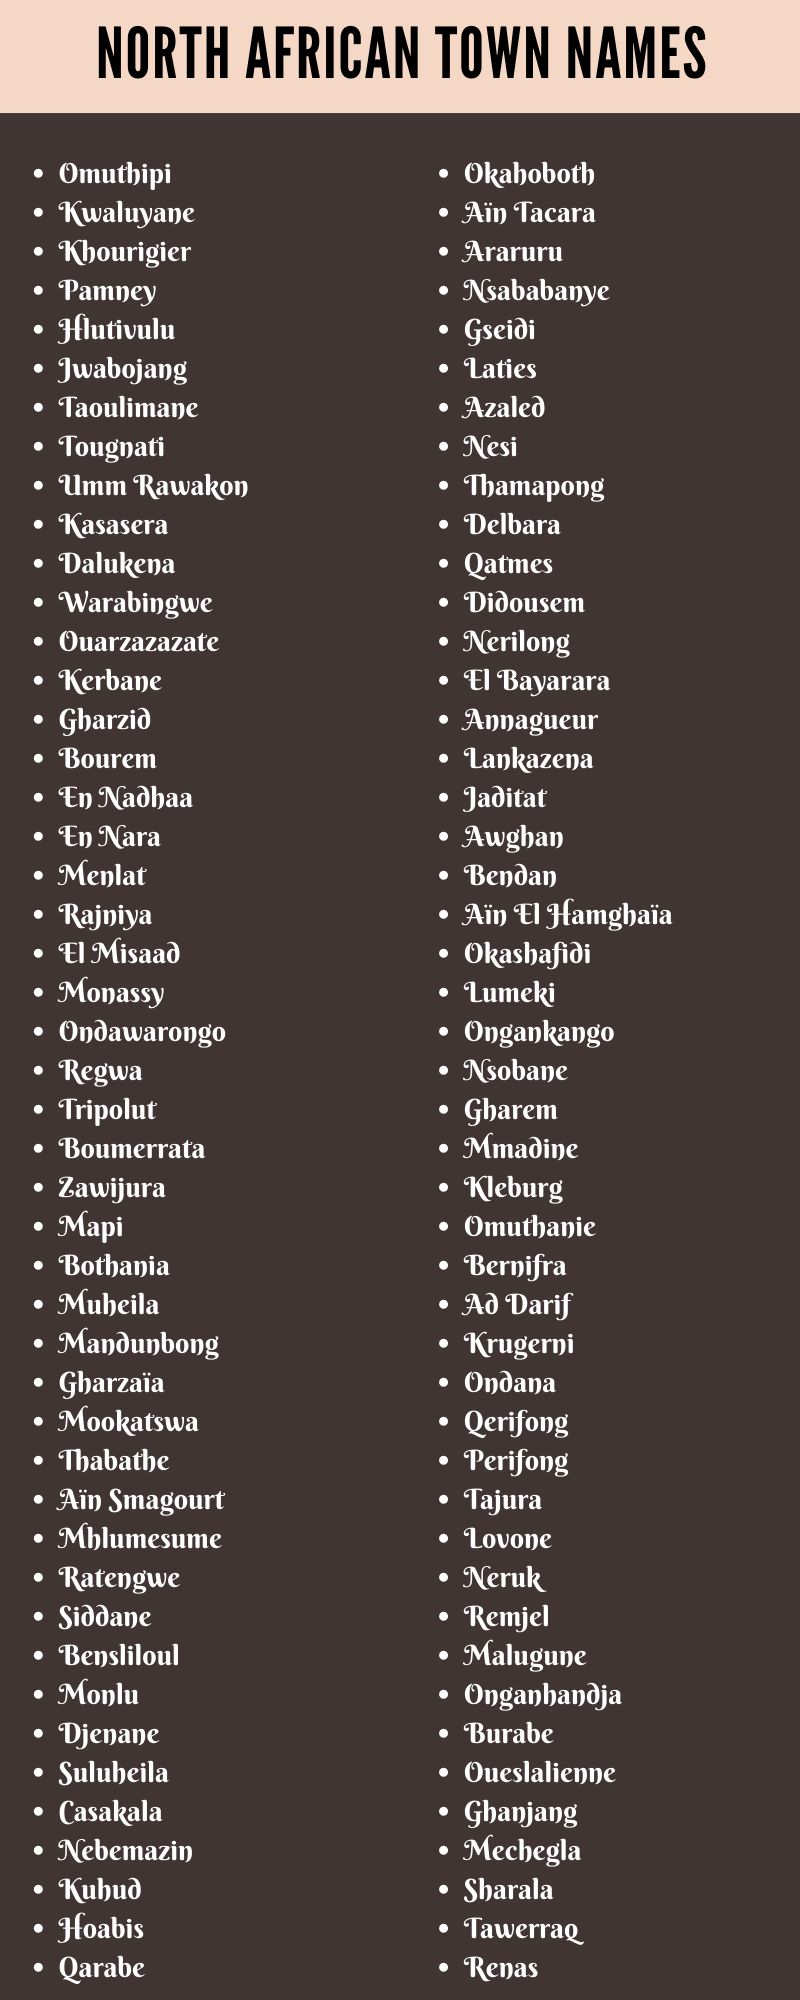 North African Town Names